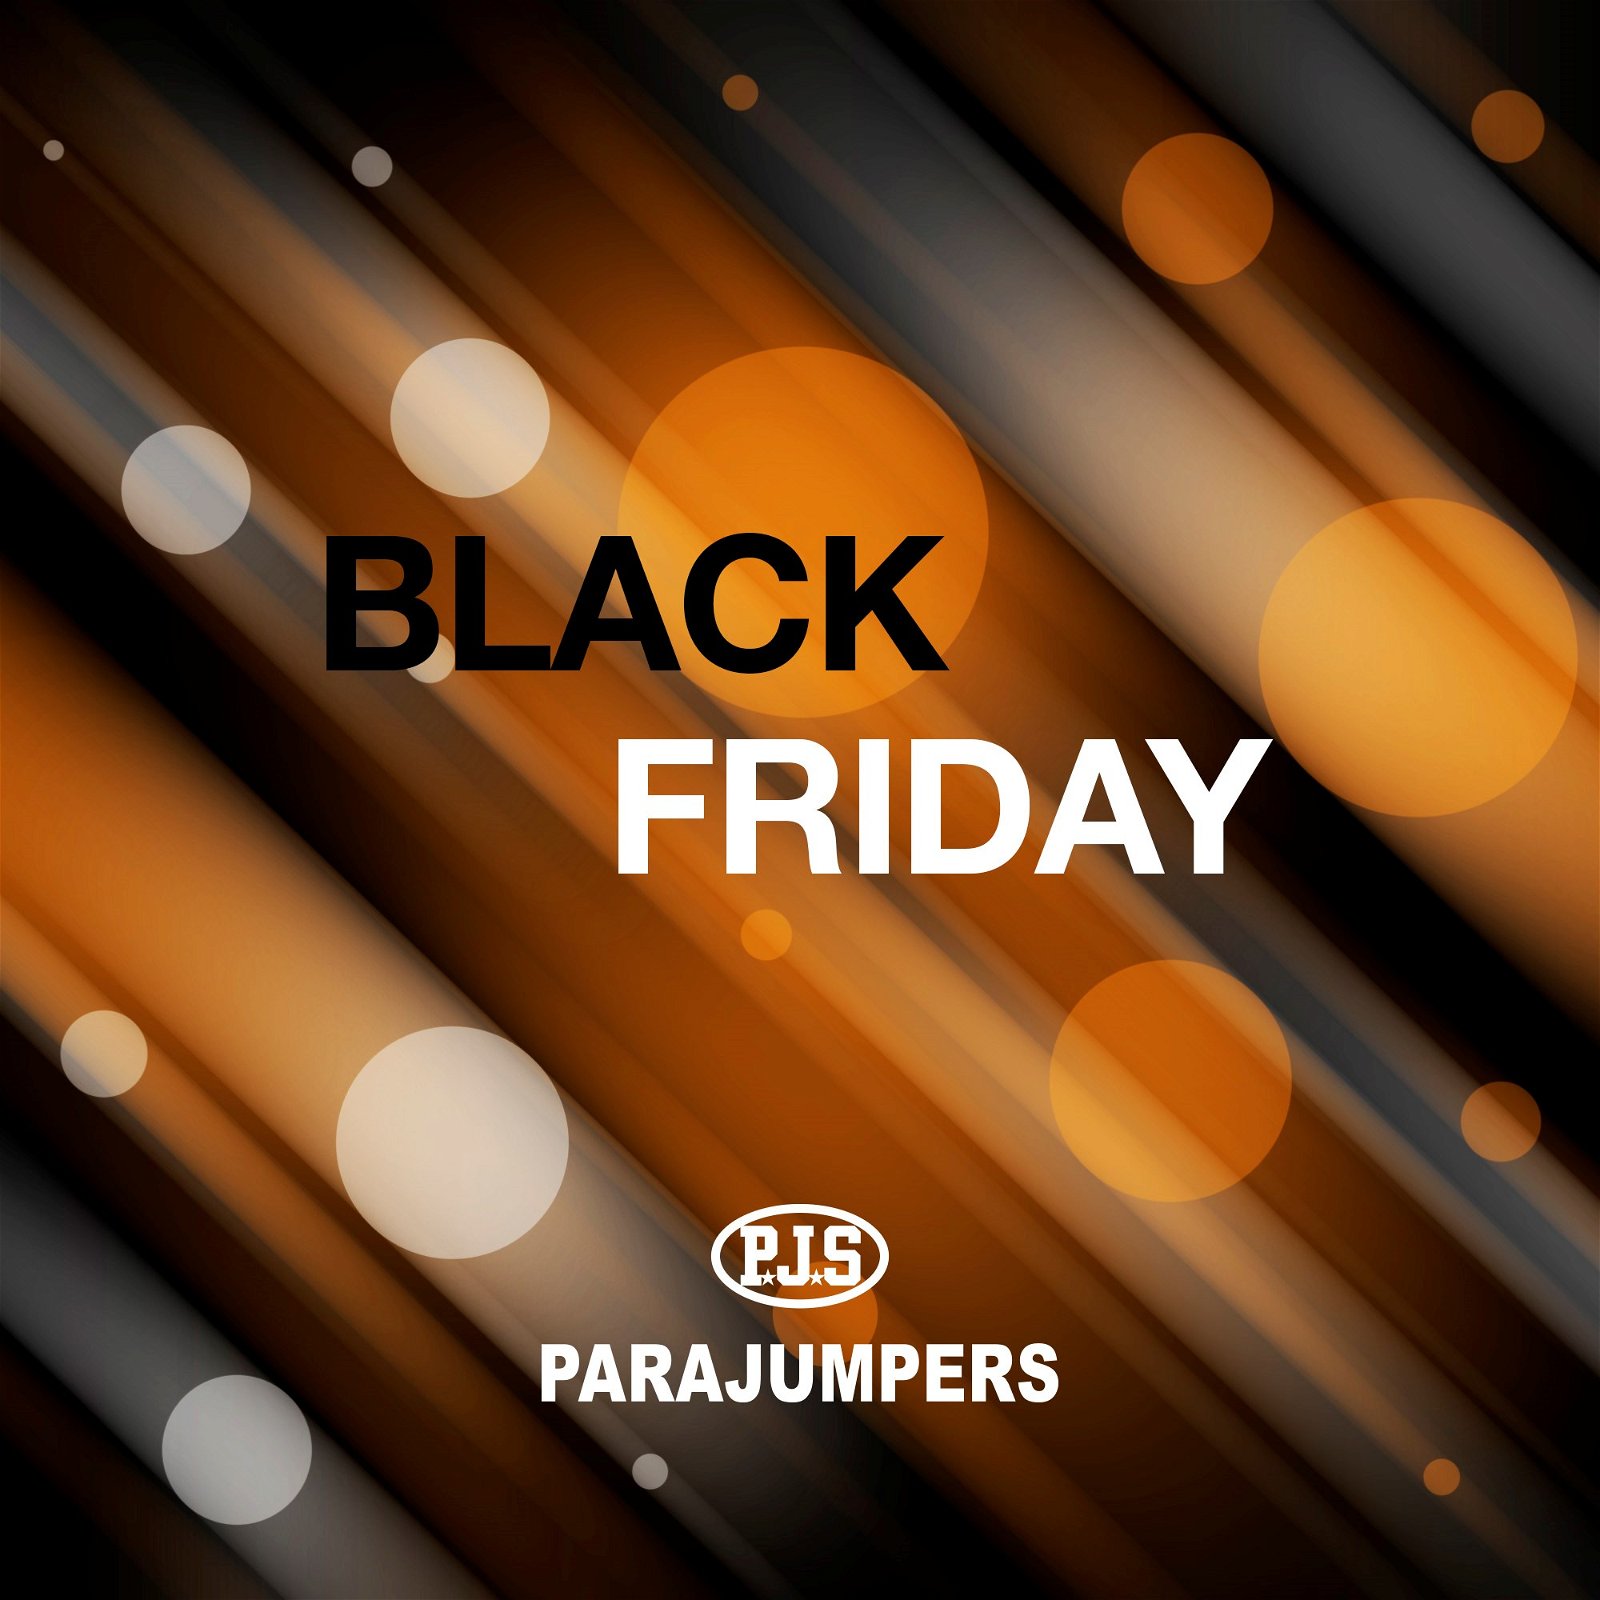 Parajumpers: Black Friday: a gift for 